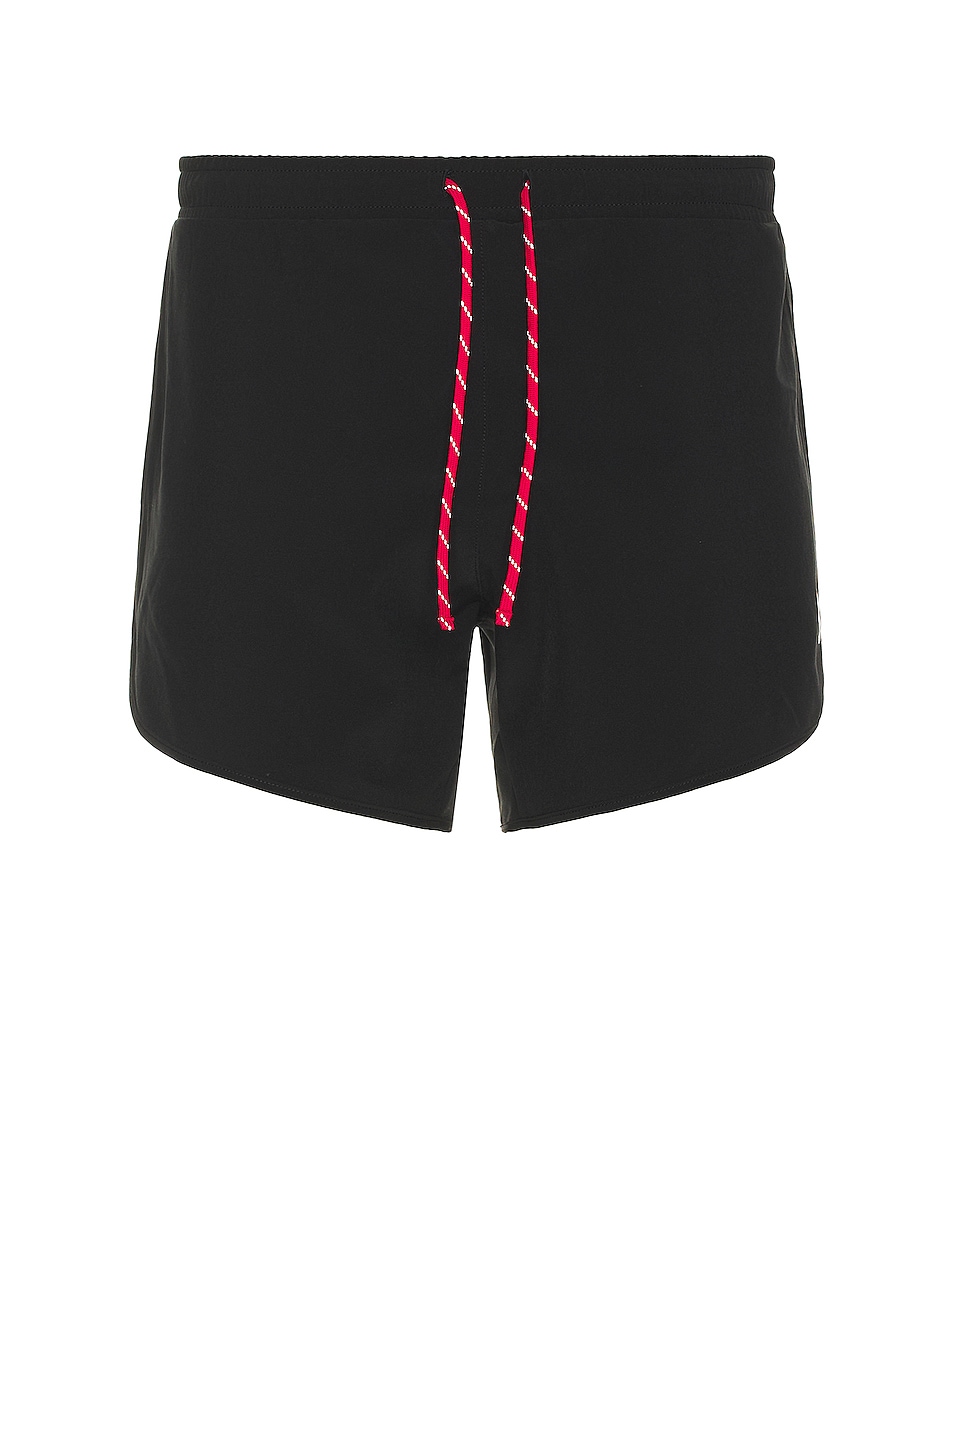 Image 1 of District Vision Spino 5" Training Short in Black